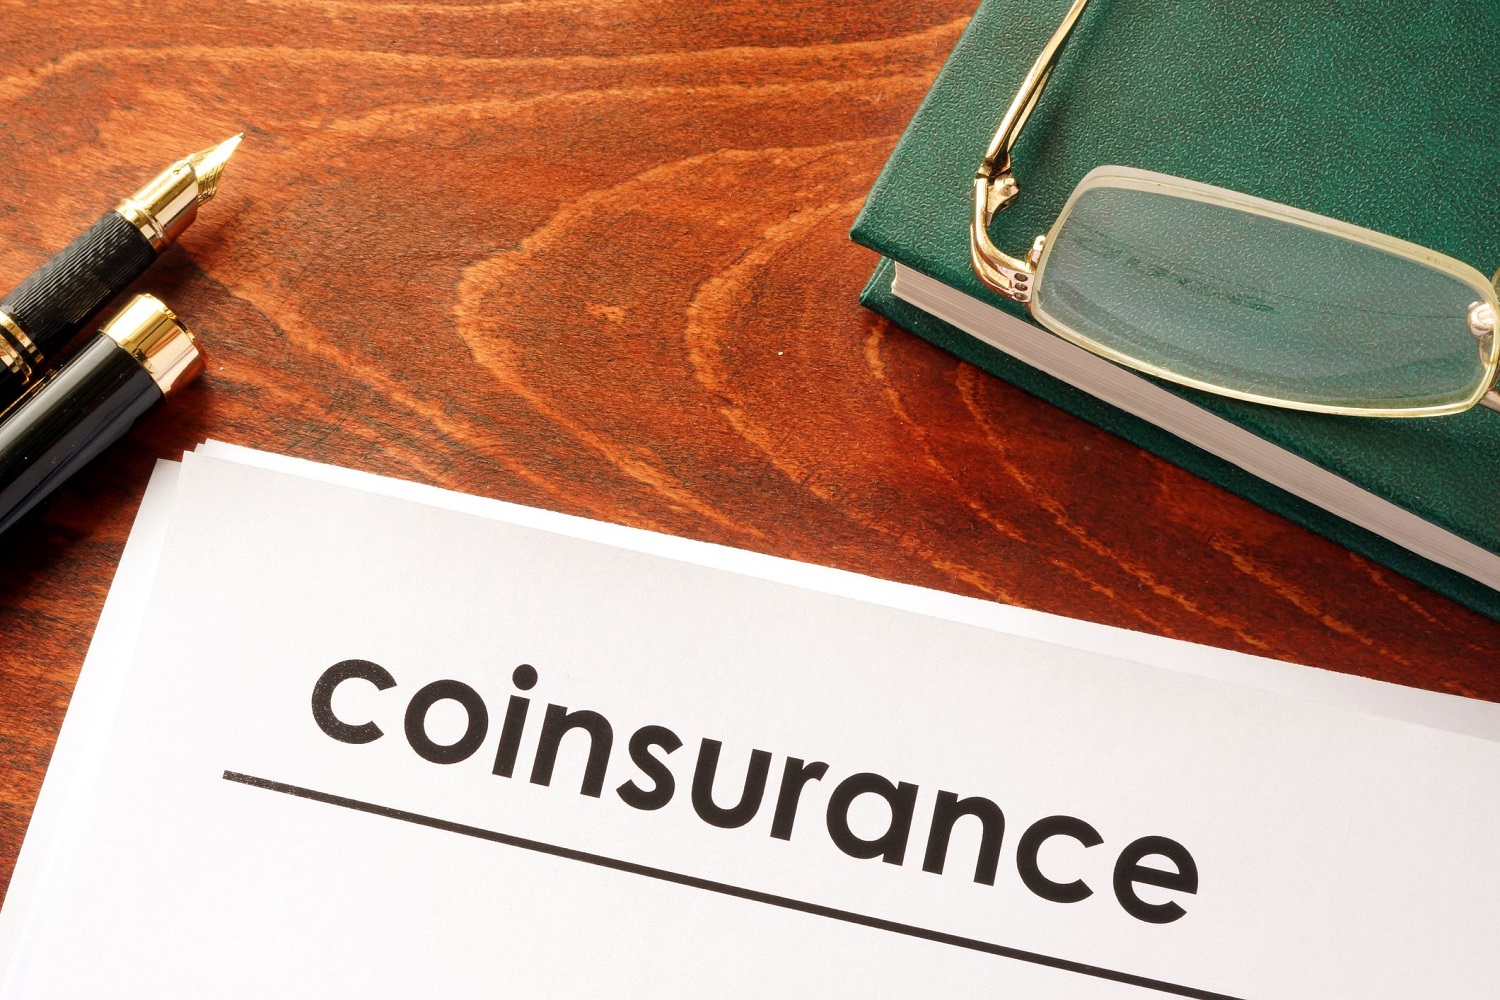 What Is Coinsurance When It Comes to Healthcare?